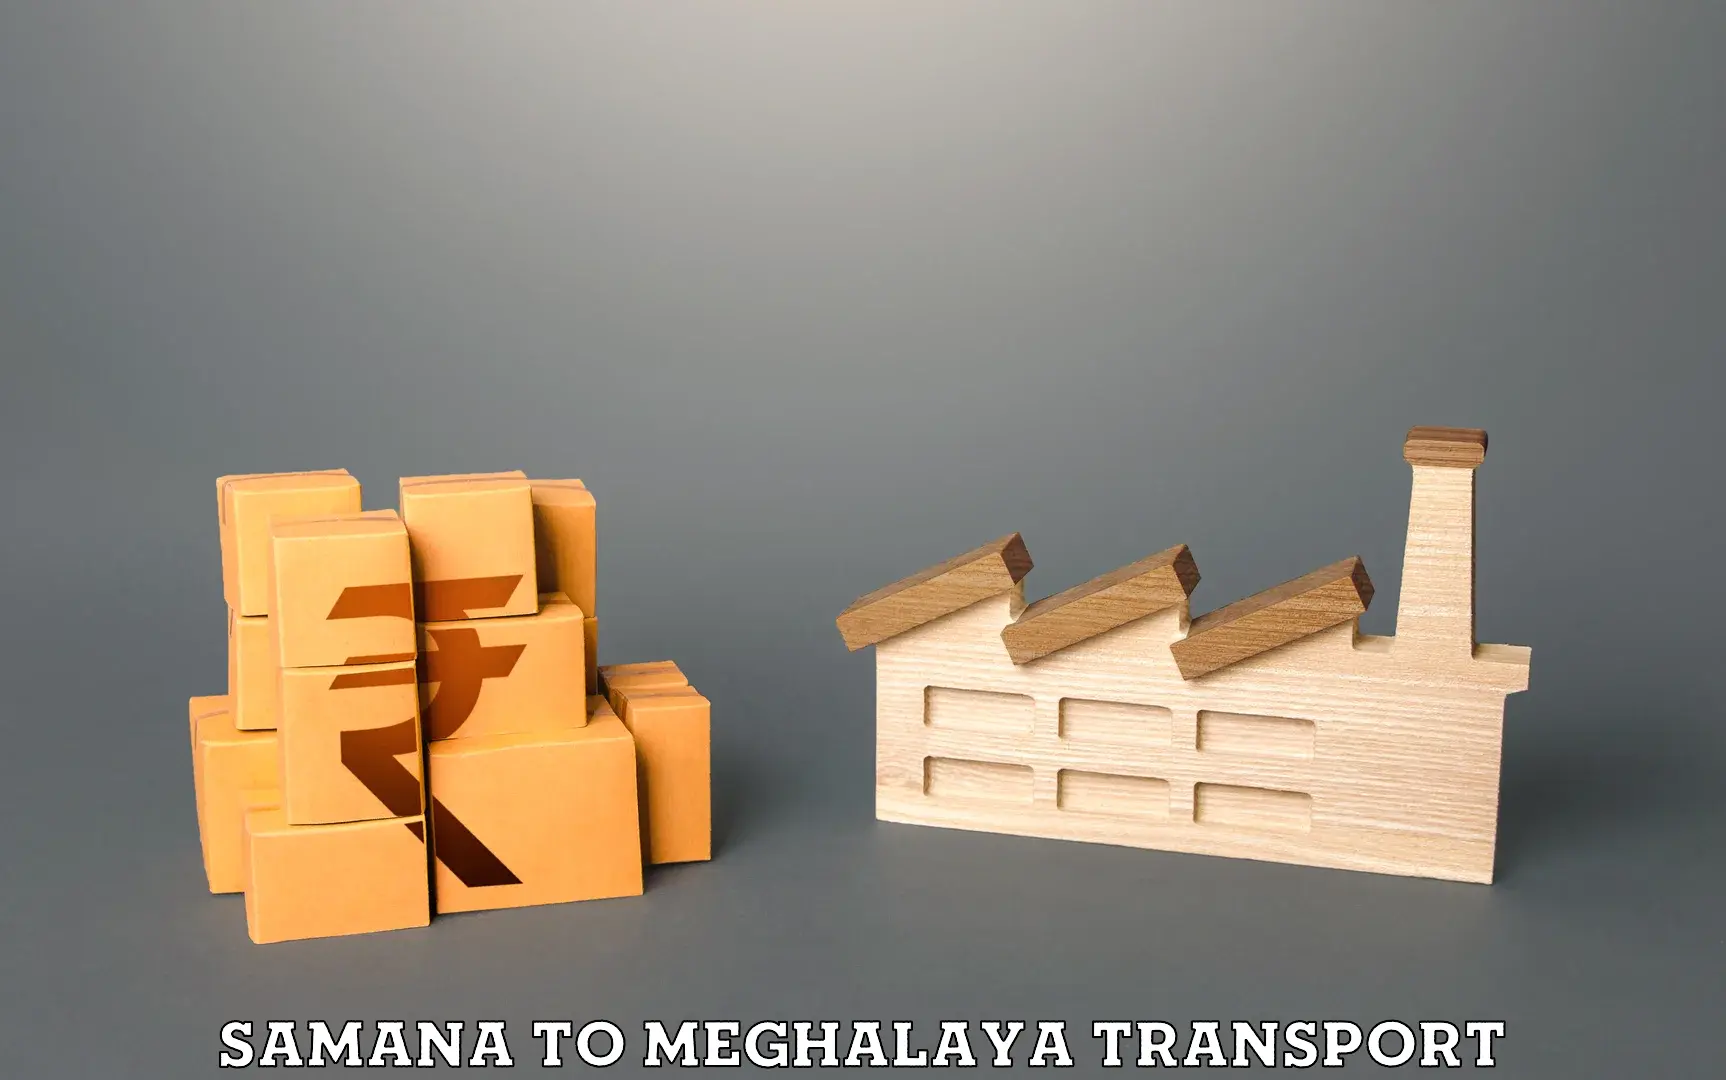 Transport bike from one state to another Samana to Meghalaya